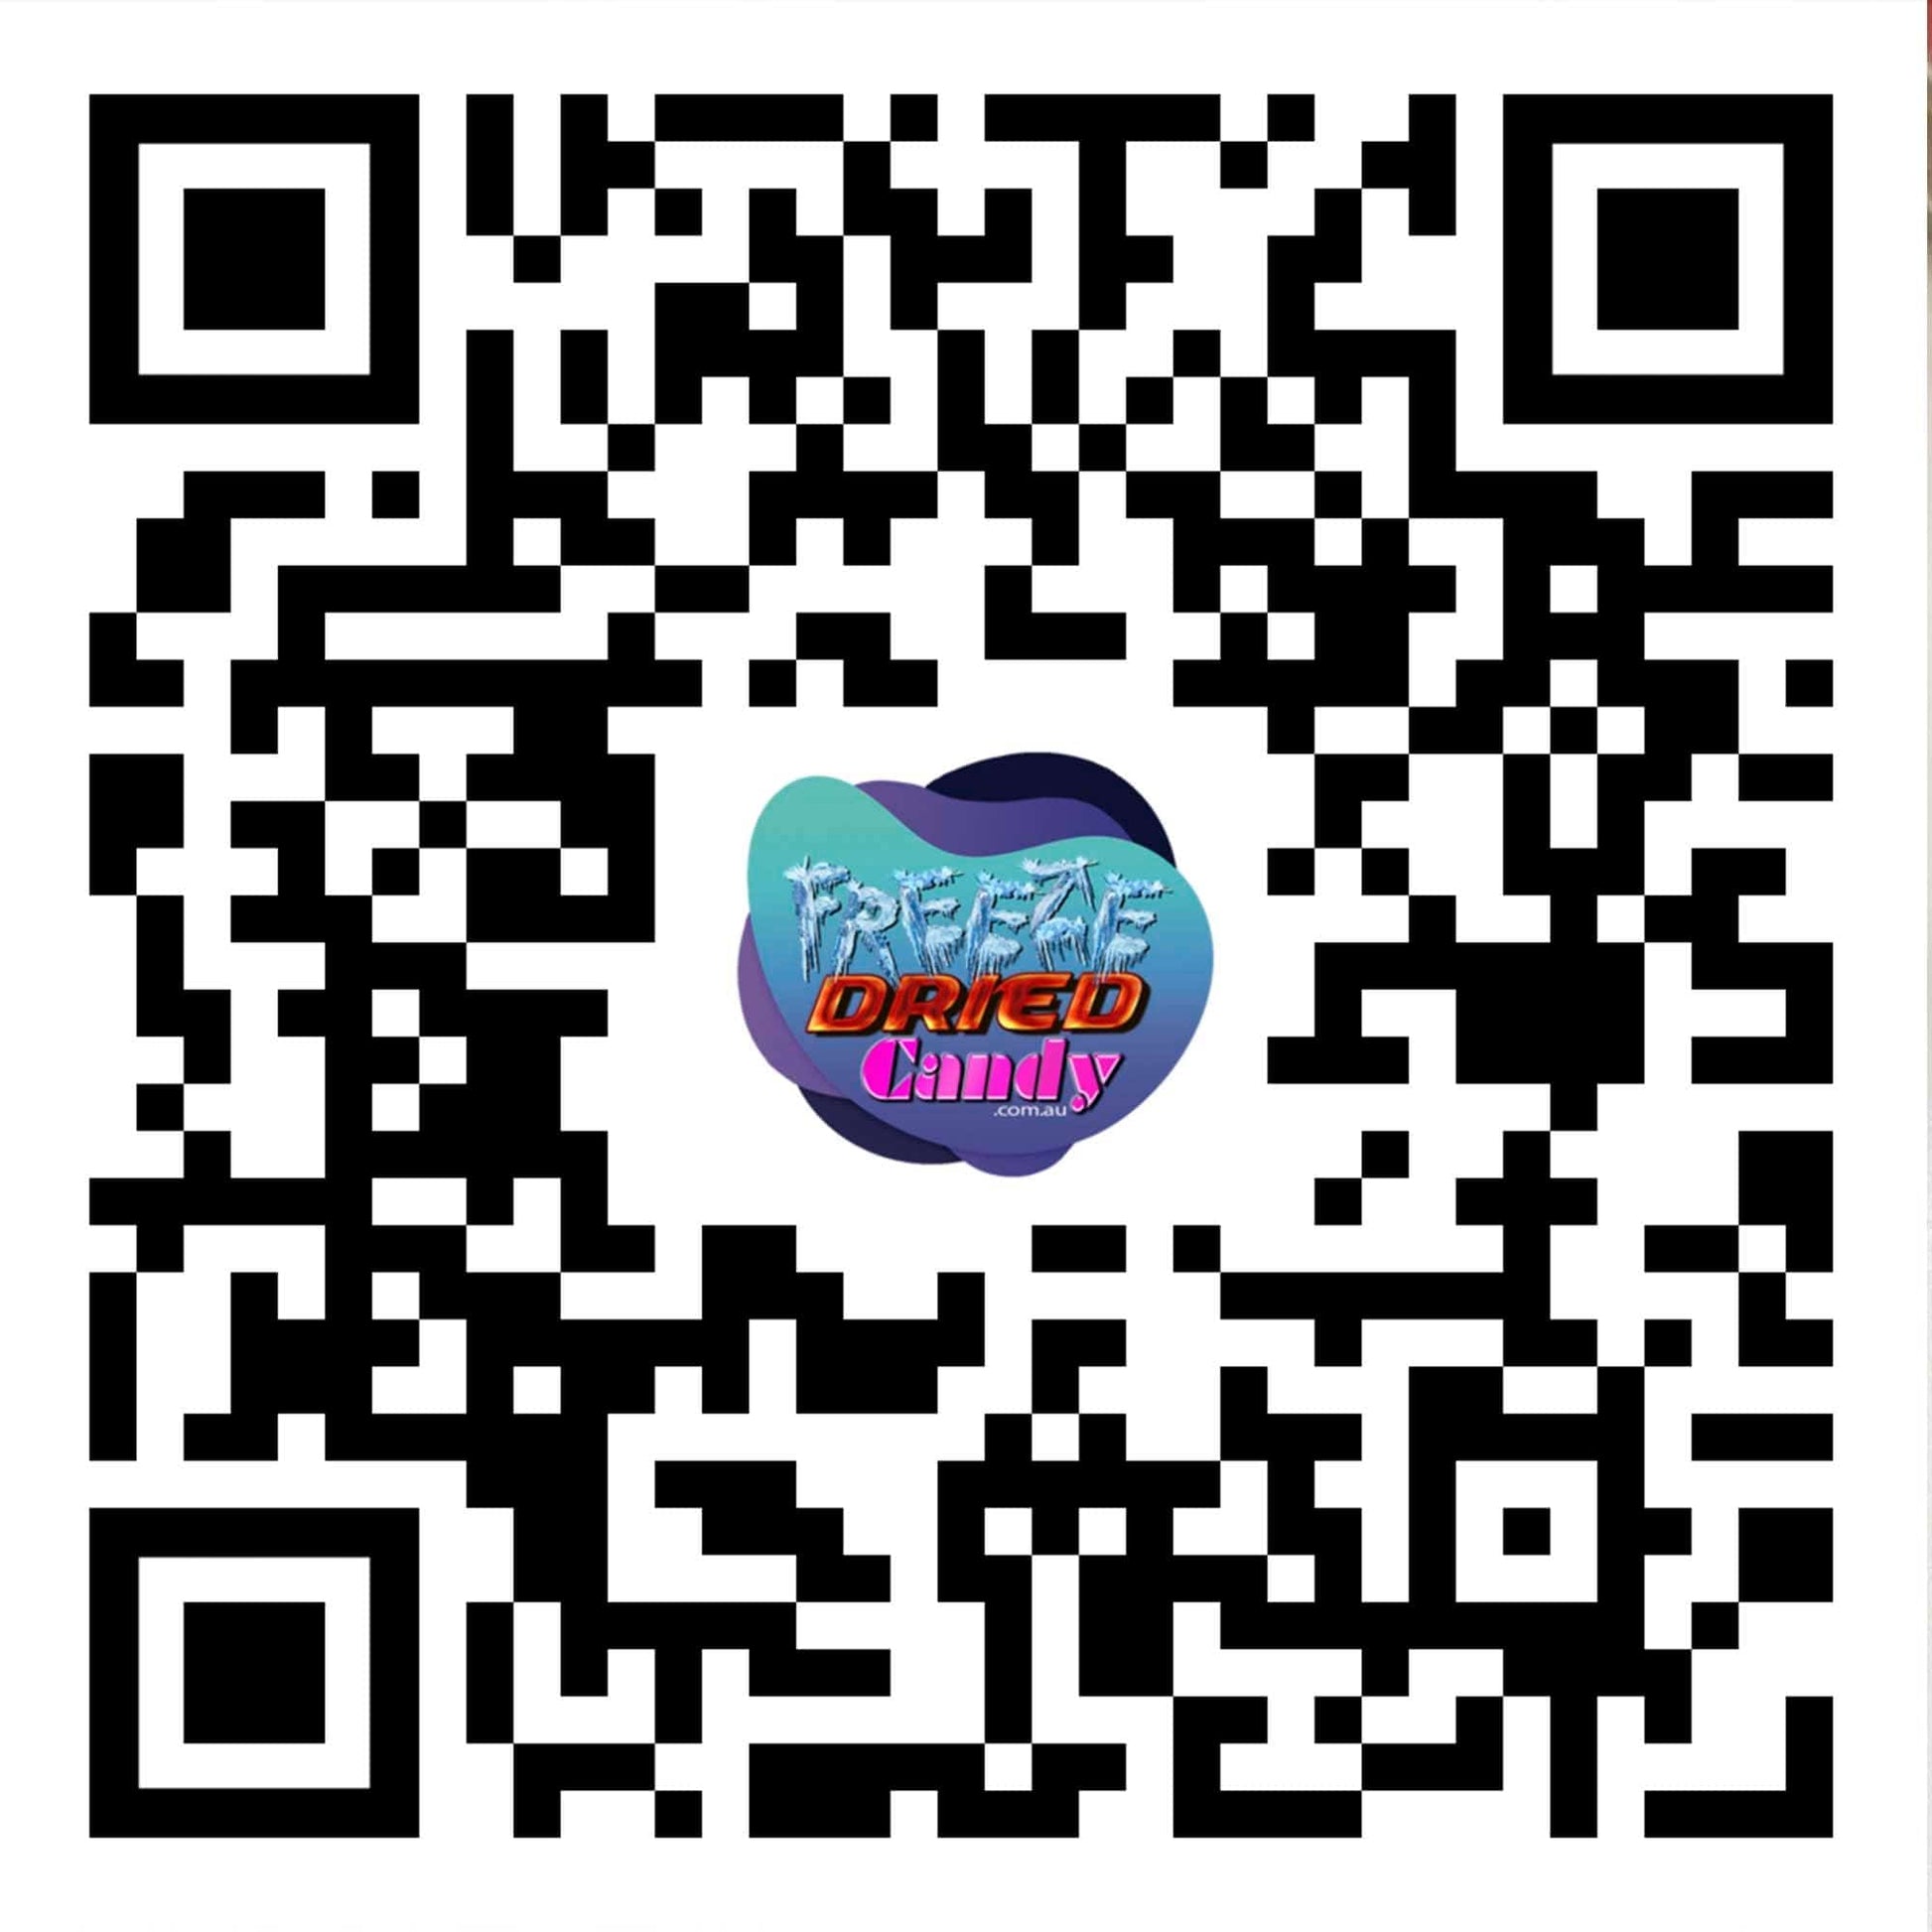 QR Code Find Us on the internet Freeze Dried Candy Lollies Treats Icecream